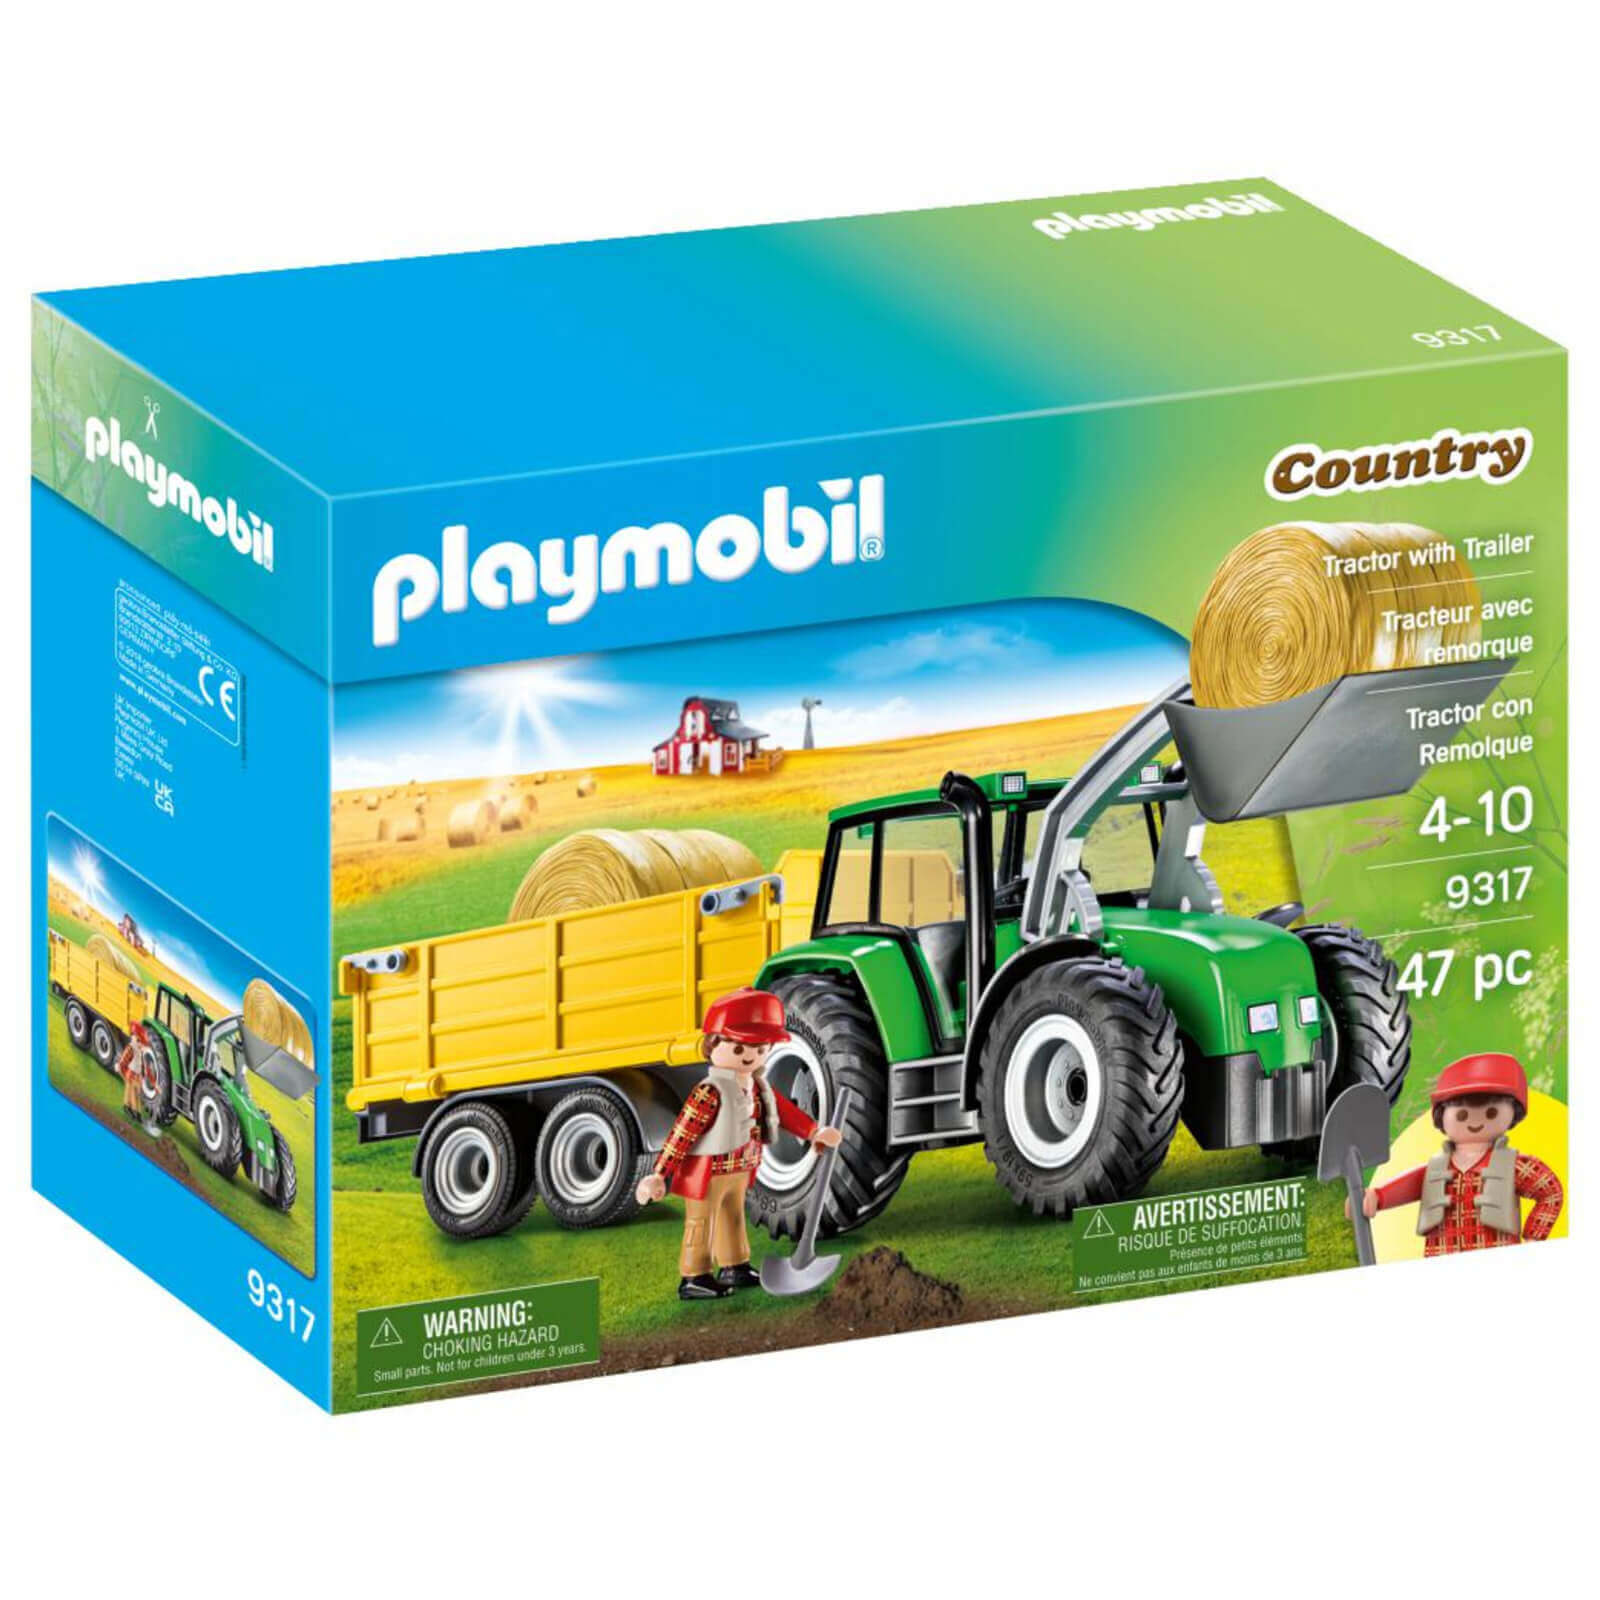 Playmobil Tractor With Trailer (9317)